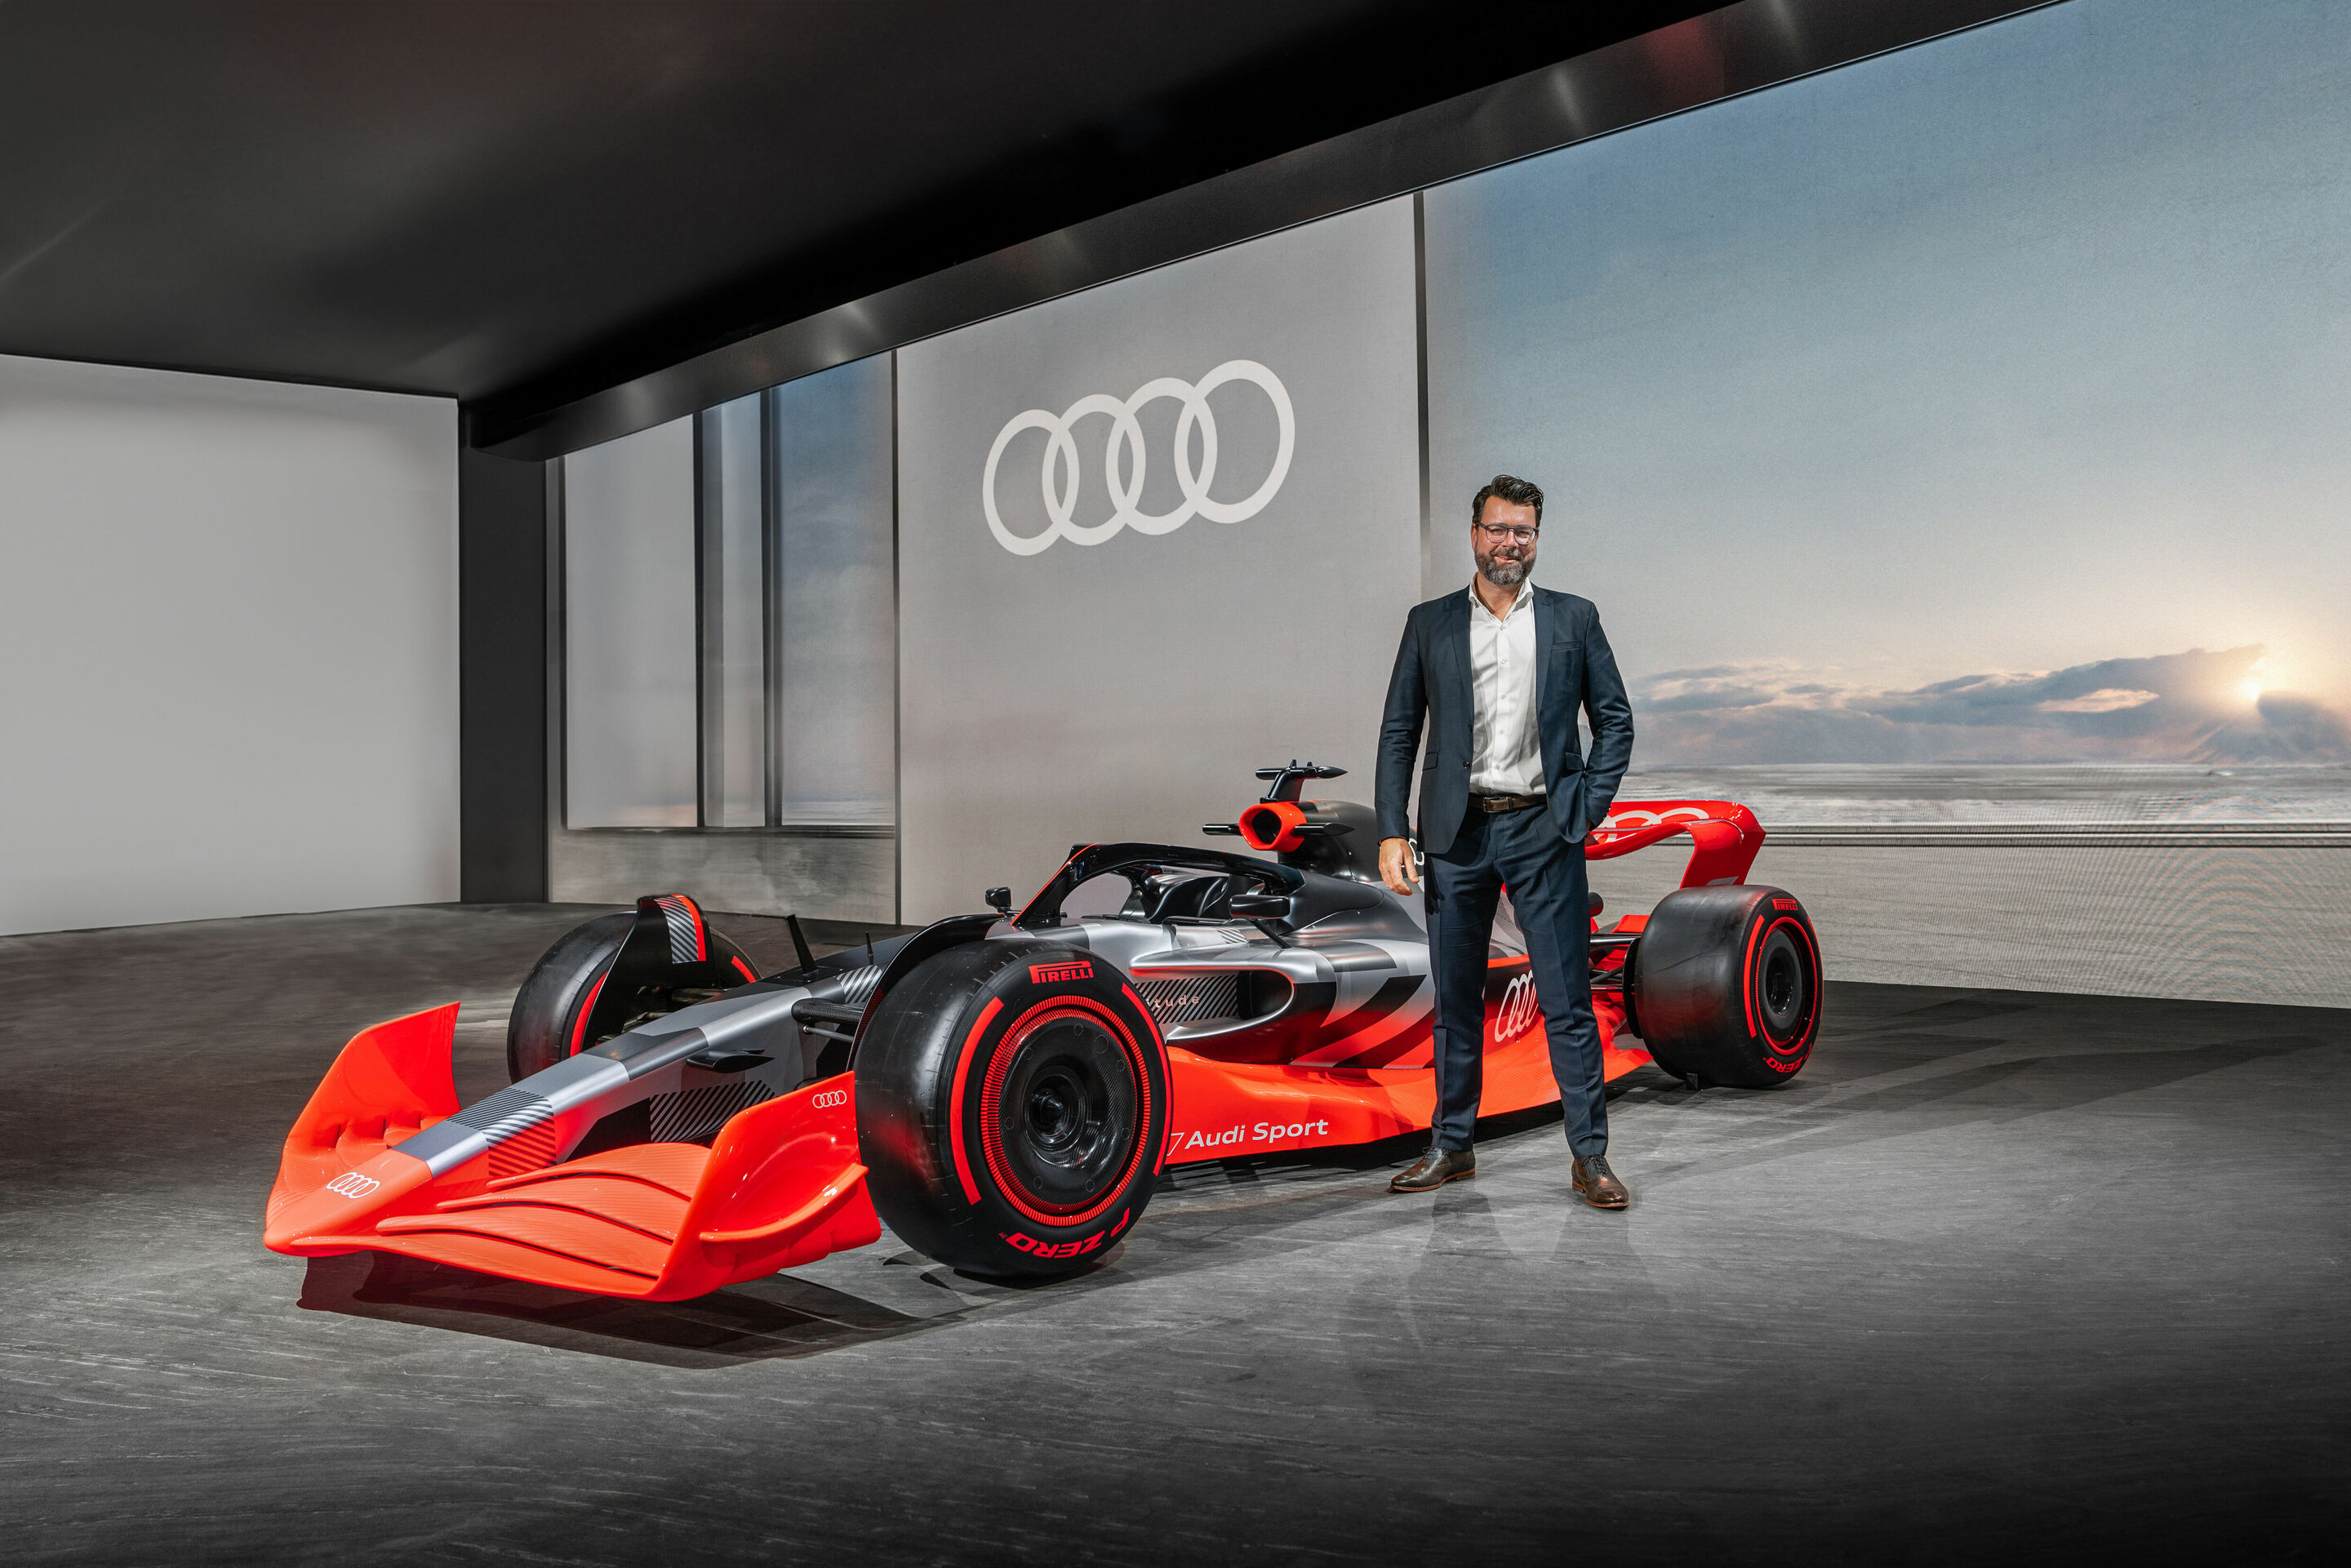 Audi significantly expands its commitment to Formula 1